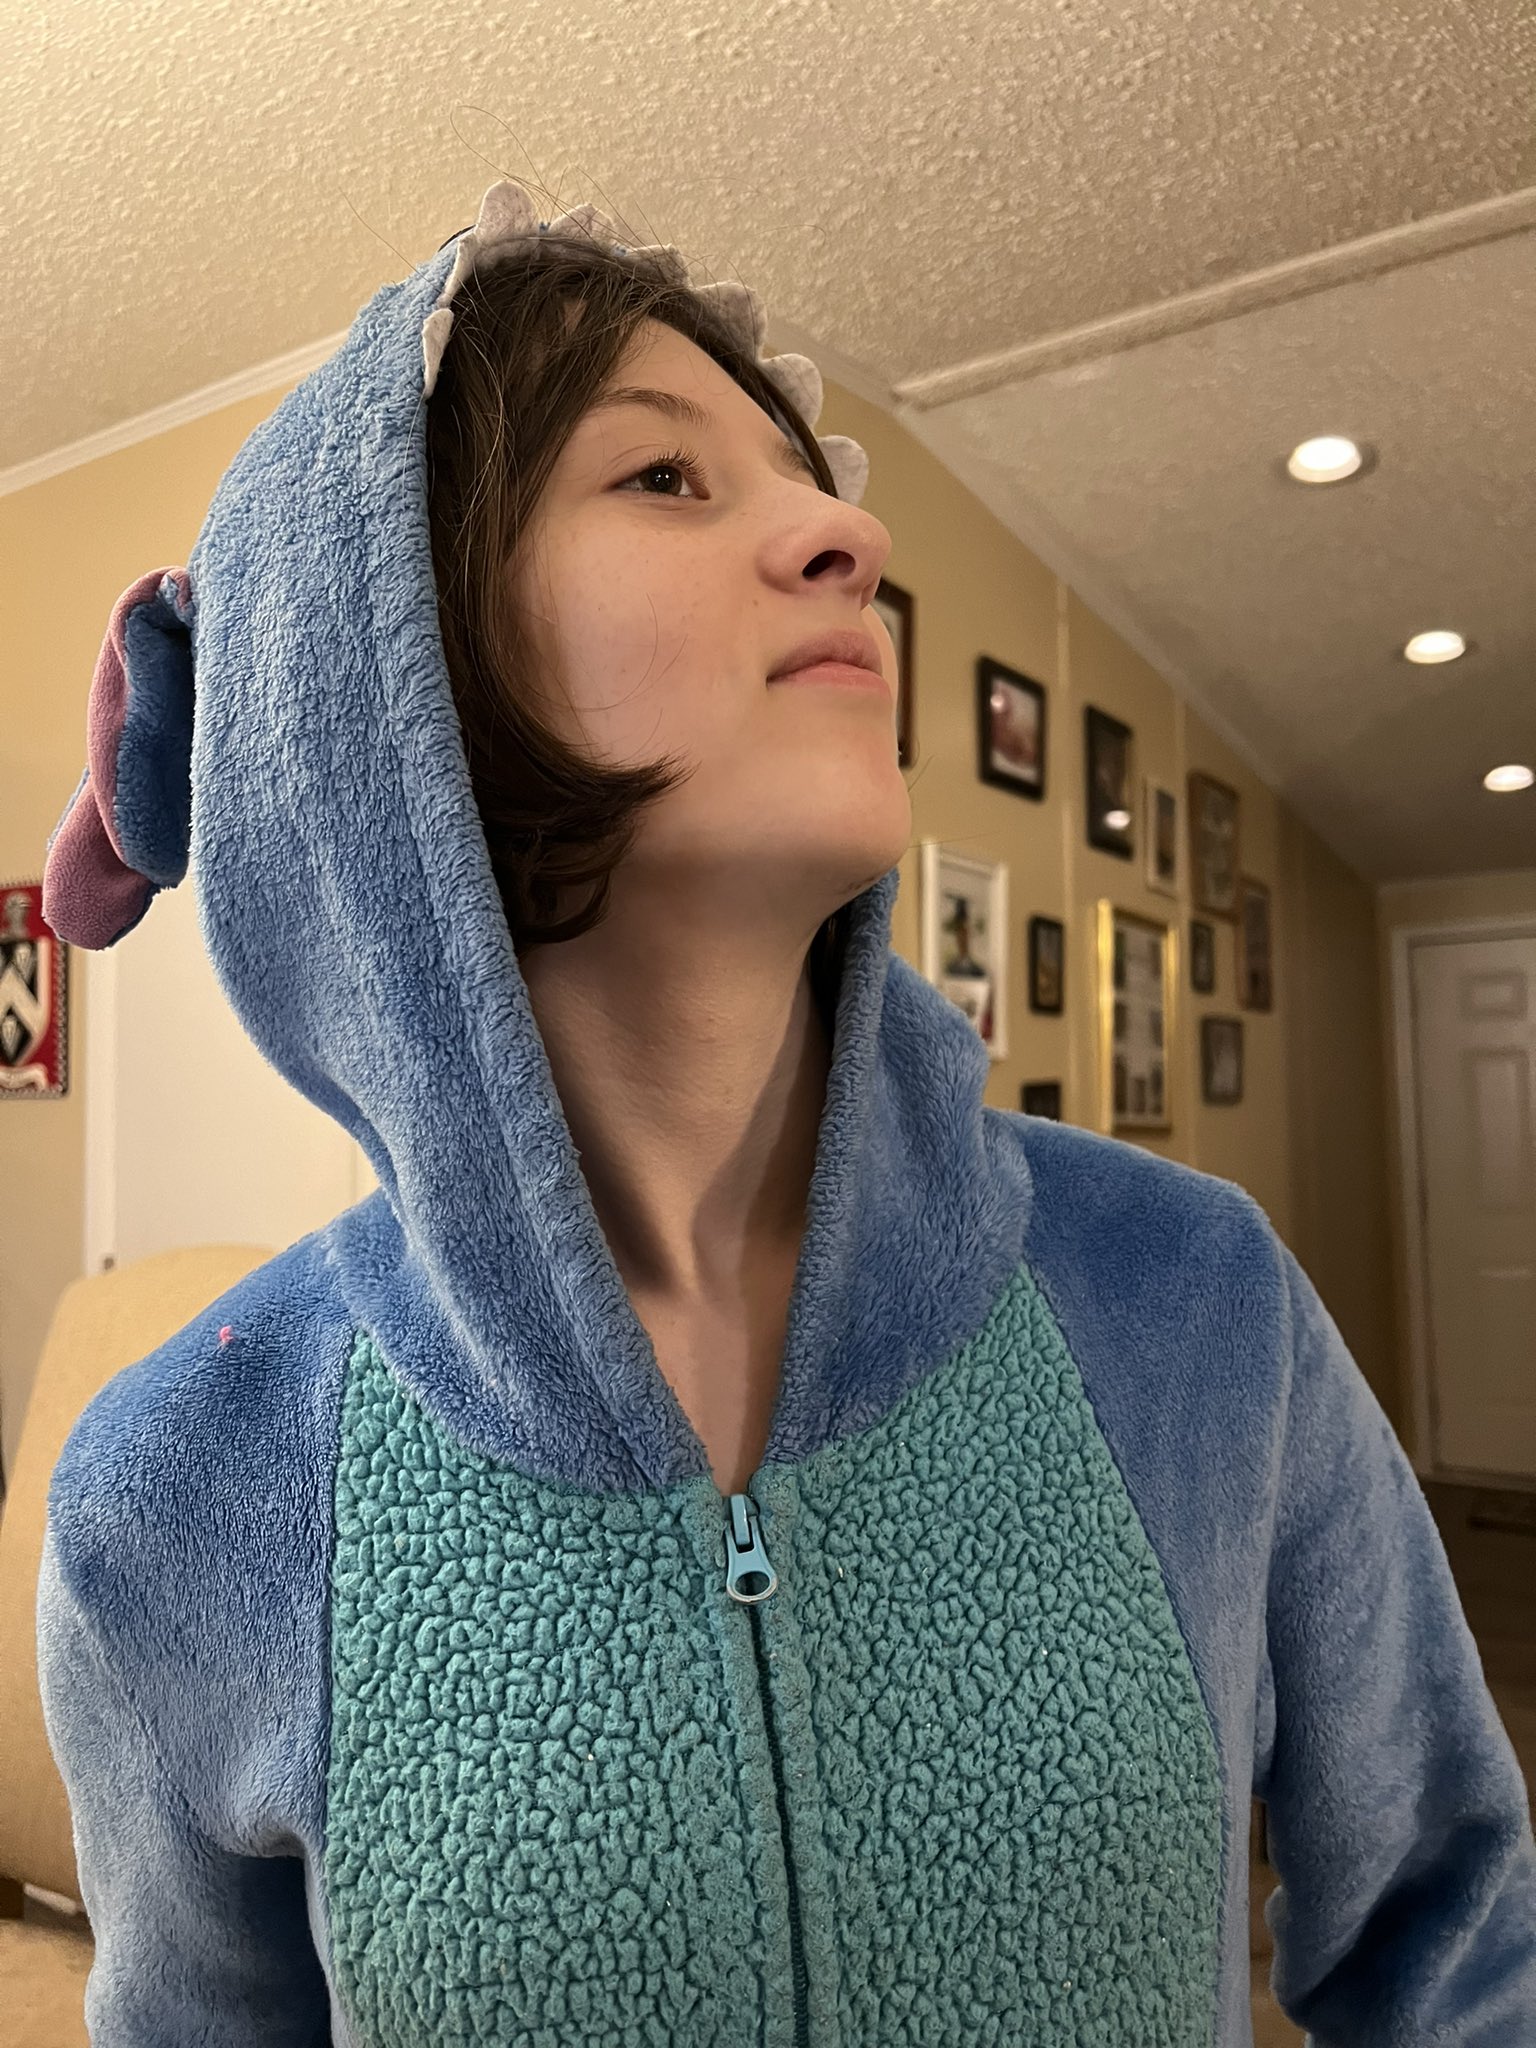 Keith Foskey on X: "I just lost monopoly to a kid in a Stitch onesie. This  is her victory pose. https://t.co/mm2rUamoaI" / X